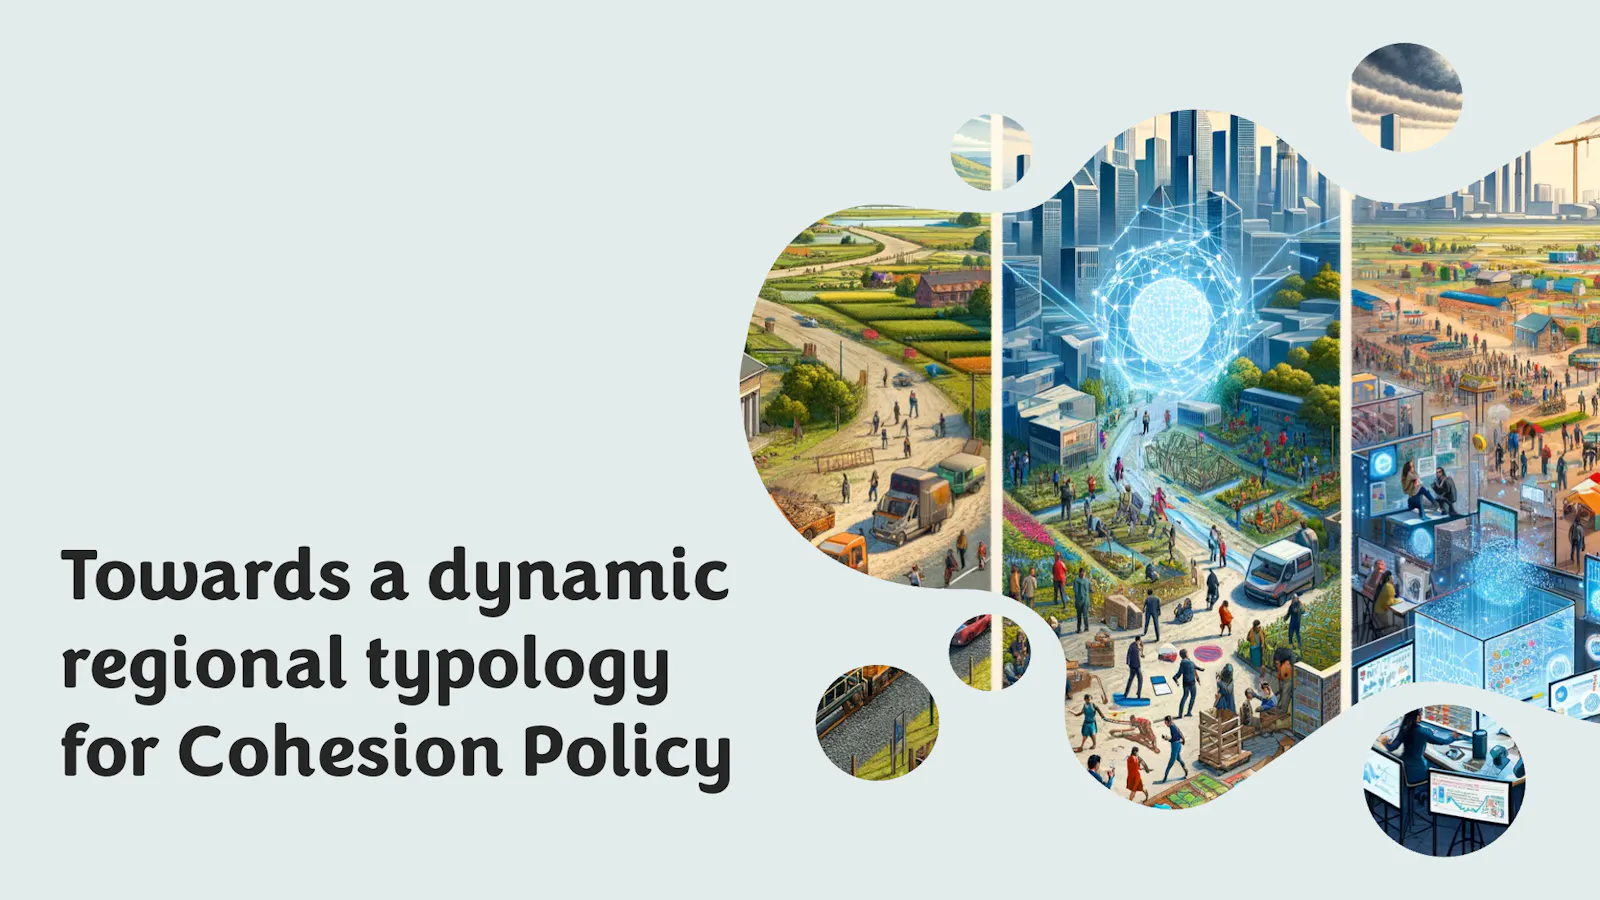 Towards a more dynamic typology of regions for Cohesion Policy.